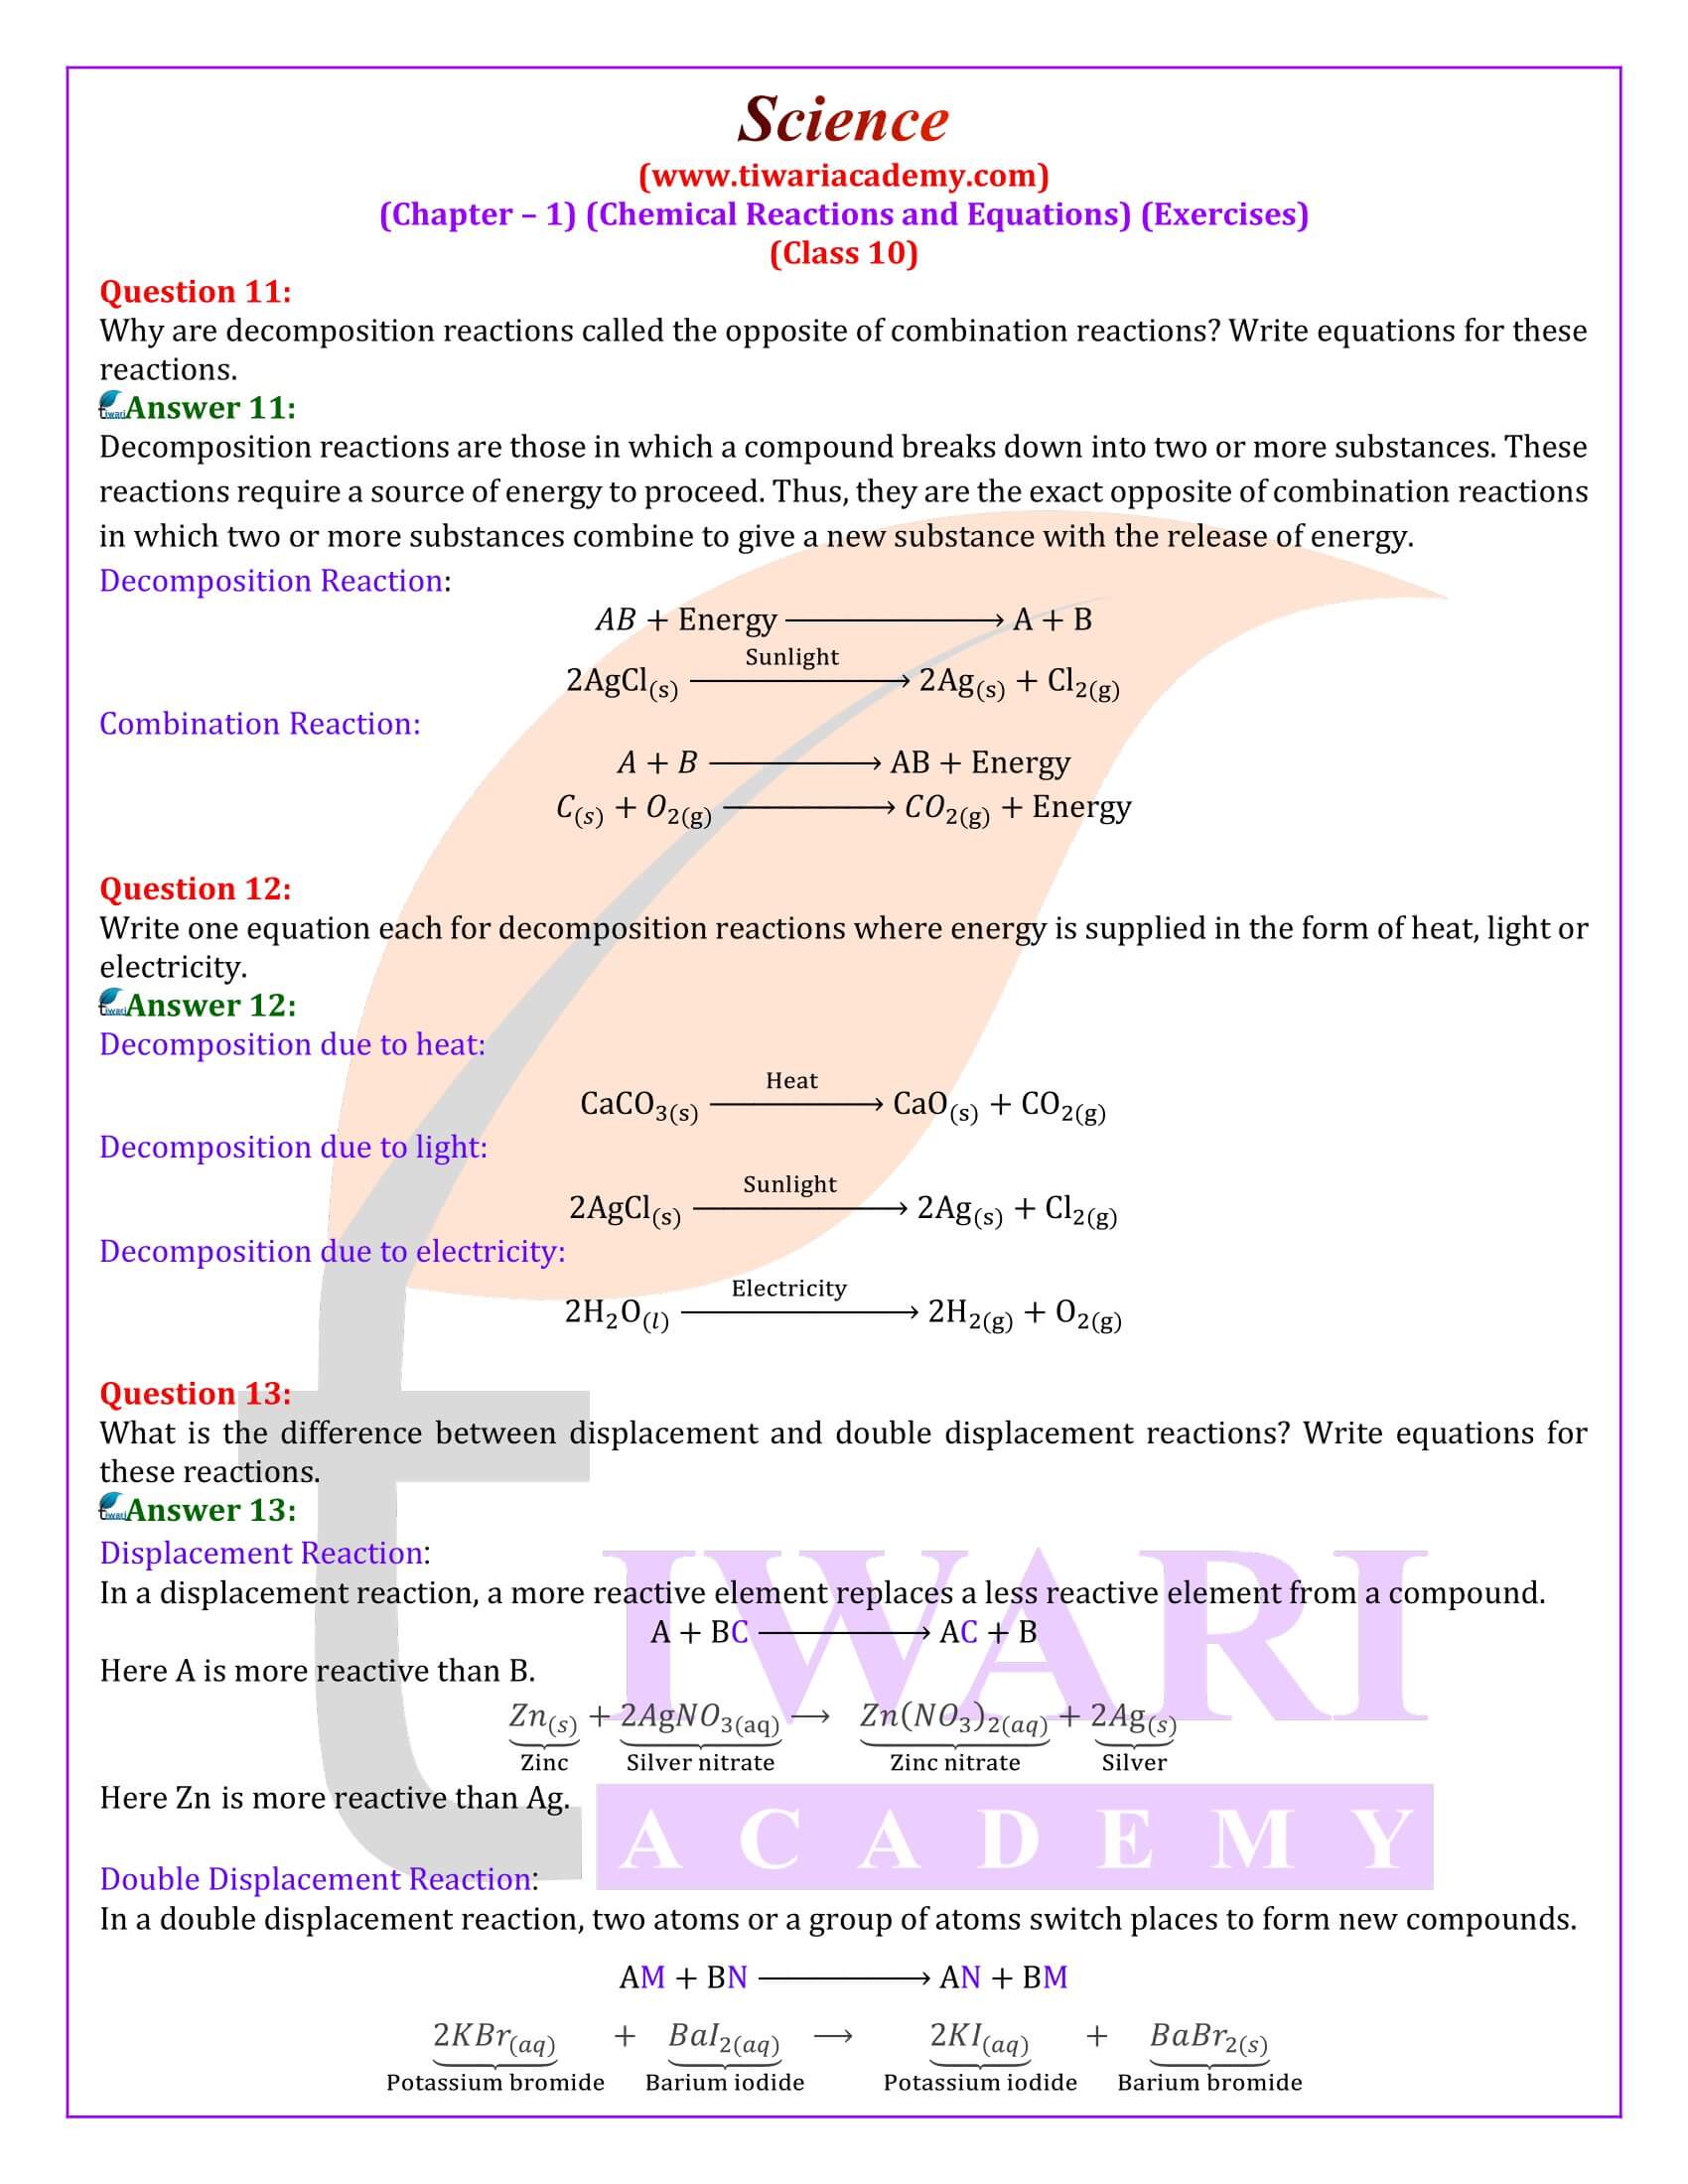 NCERT Solutions for Class 10 Science Chapter 1 in English Medium